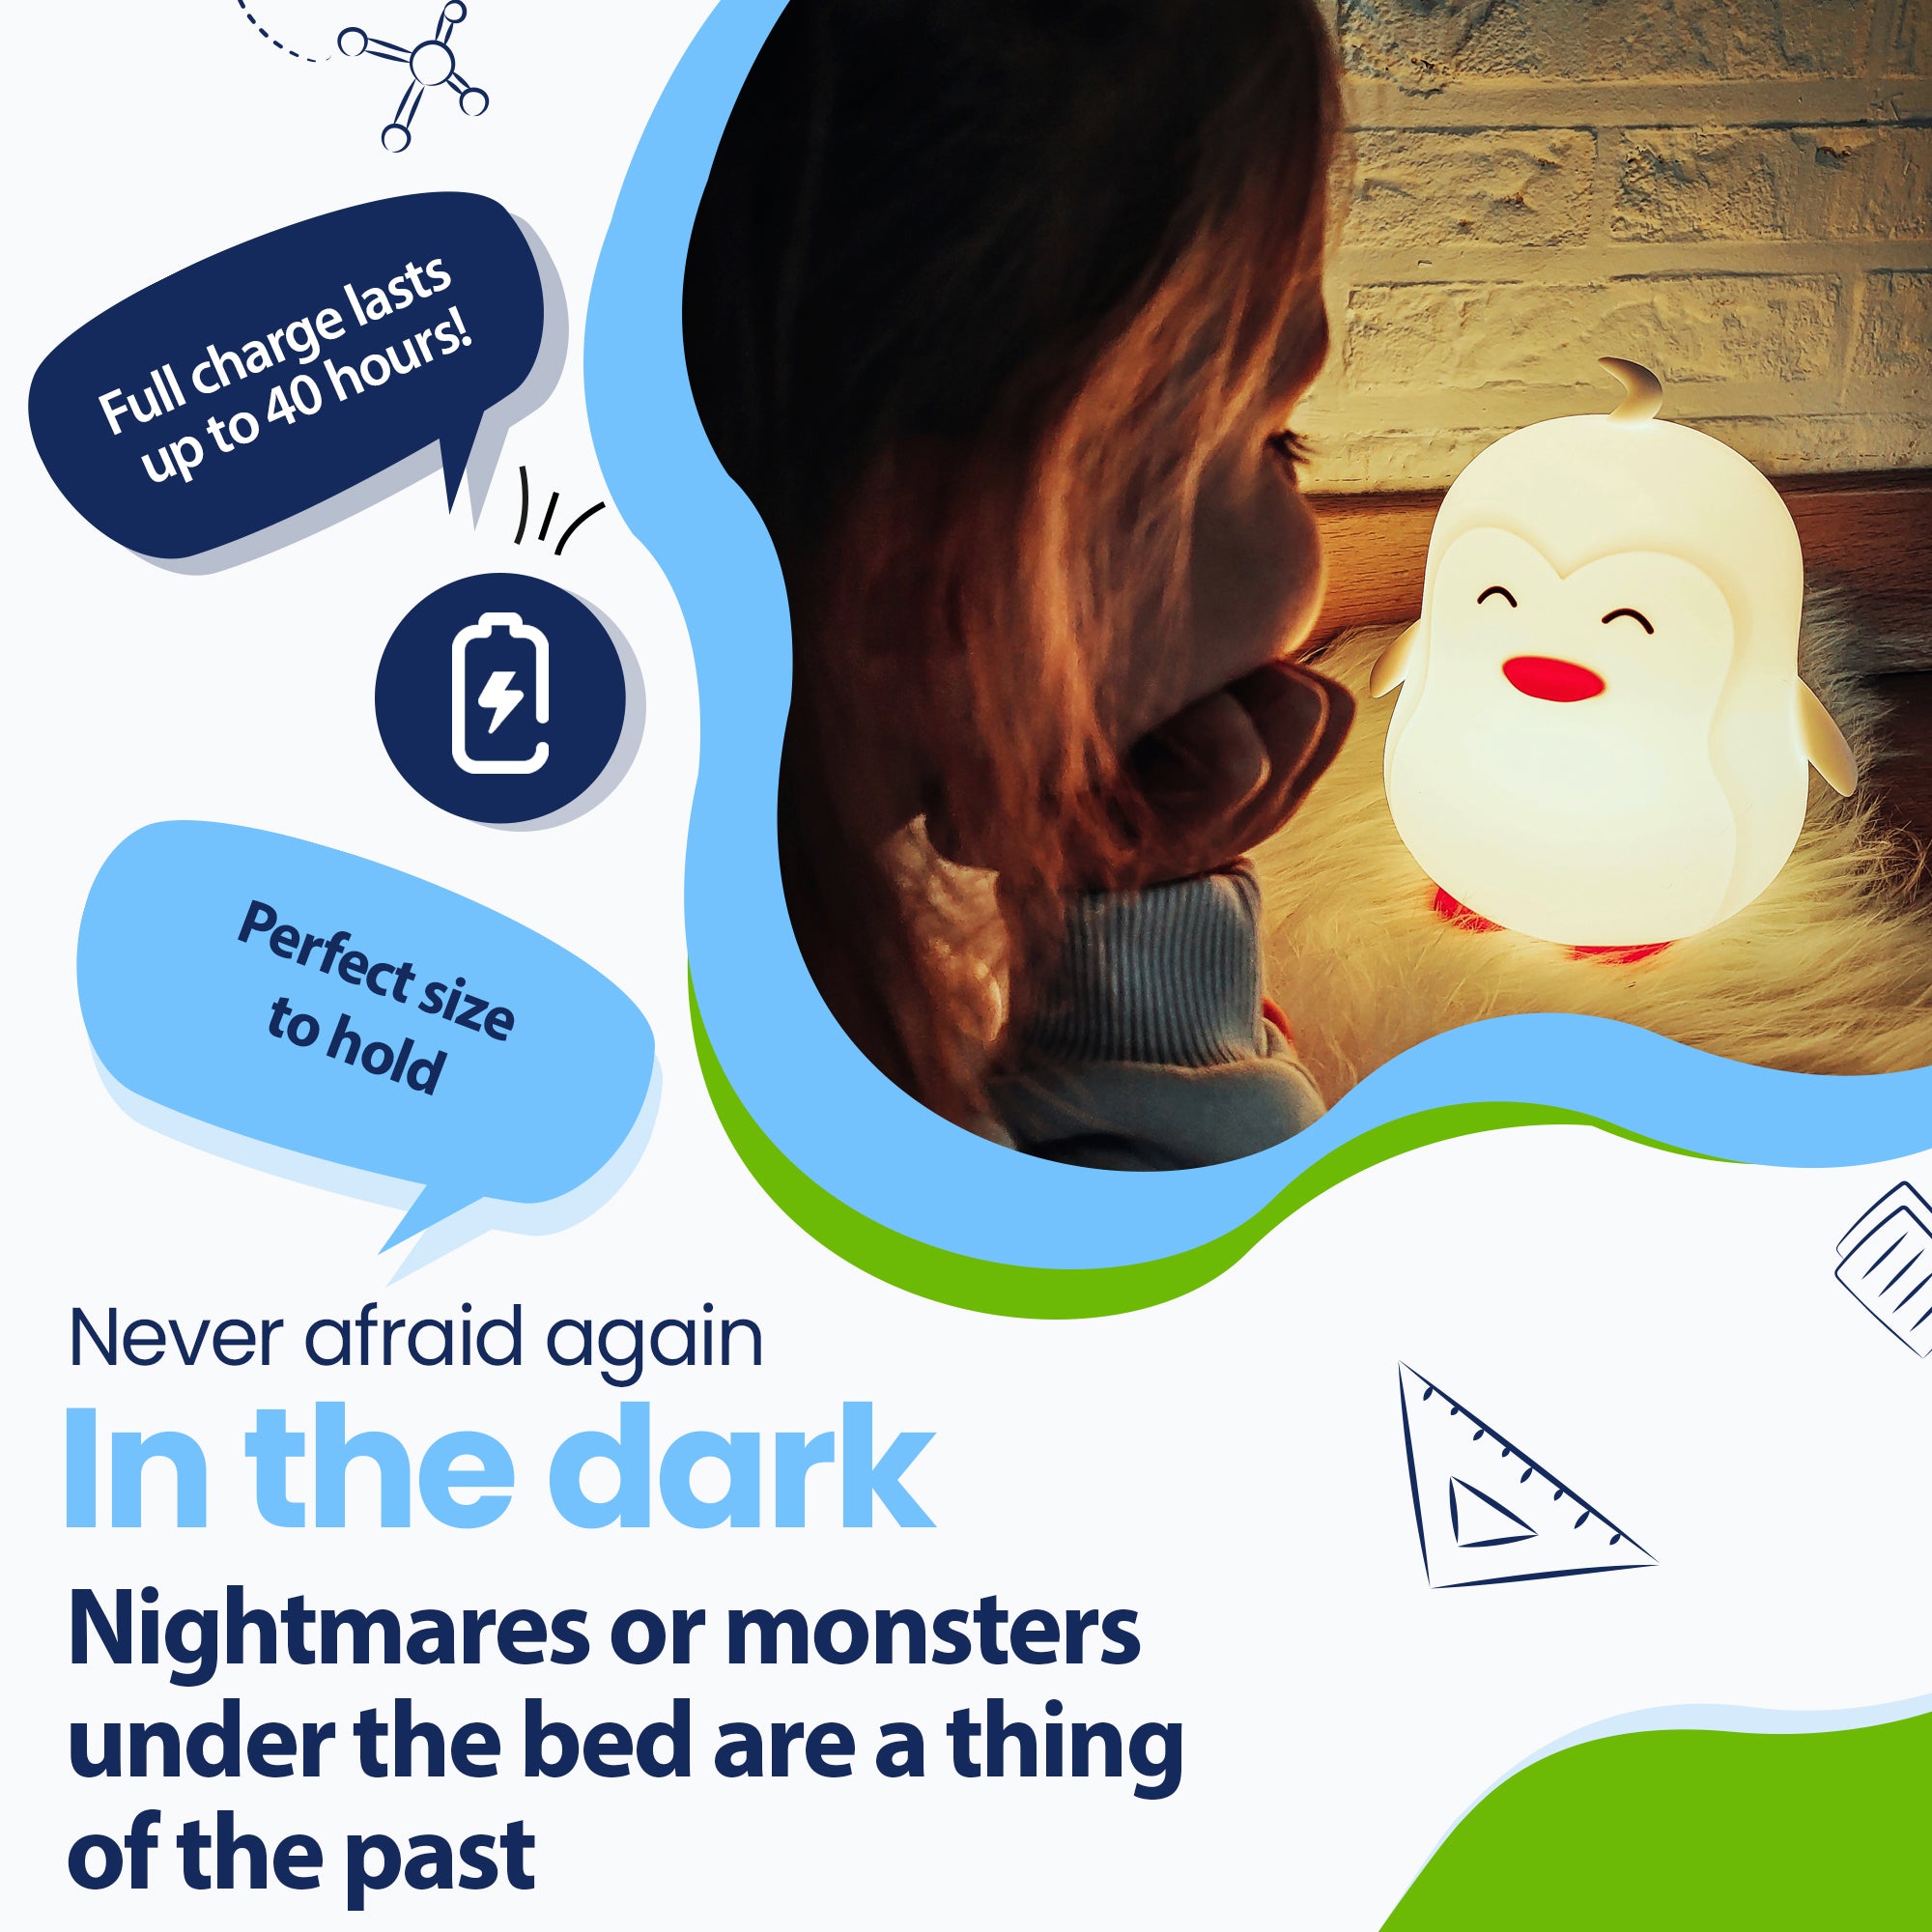 Never be afraid of the dark again - Nightmares or monsters under the bed are a thing of the past - Lasts up to 40 hours - Perfect size to hold